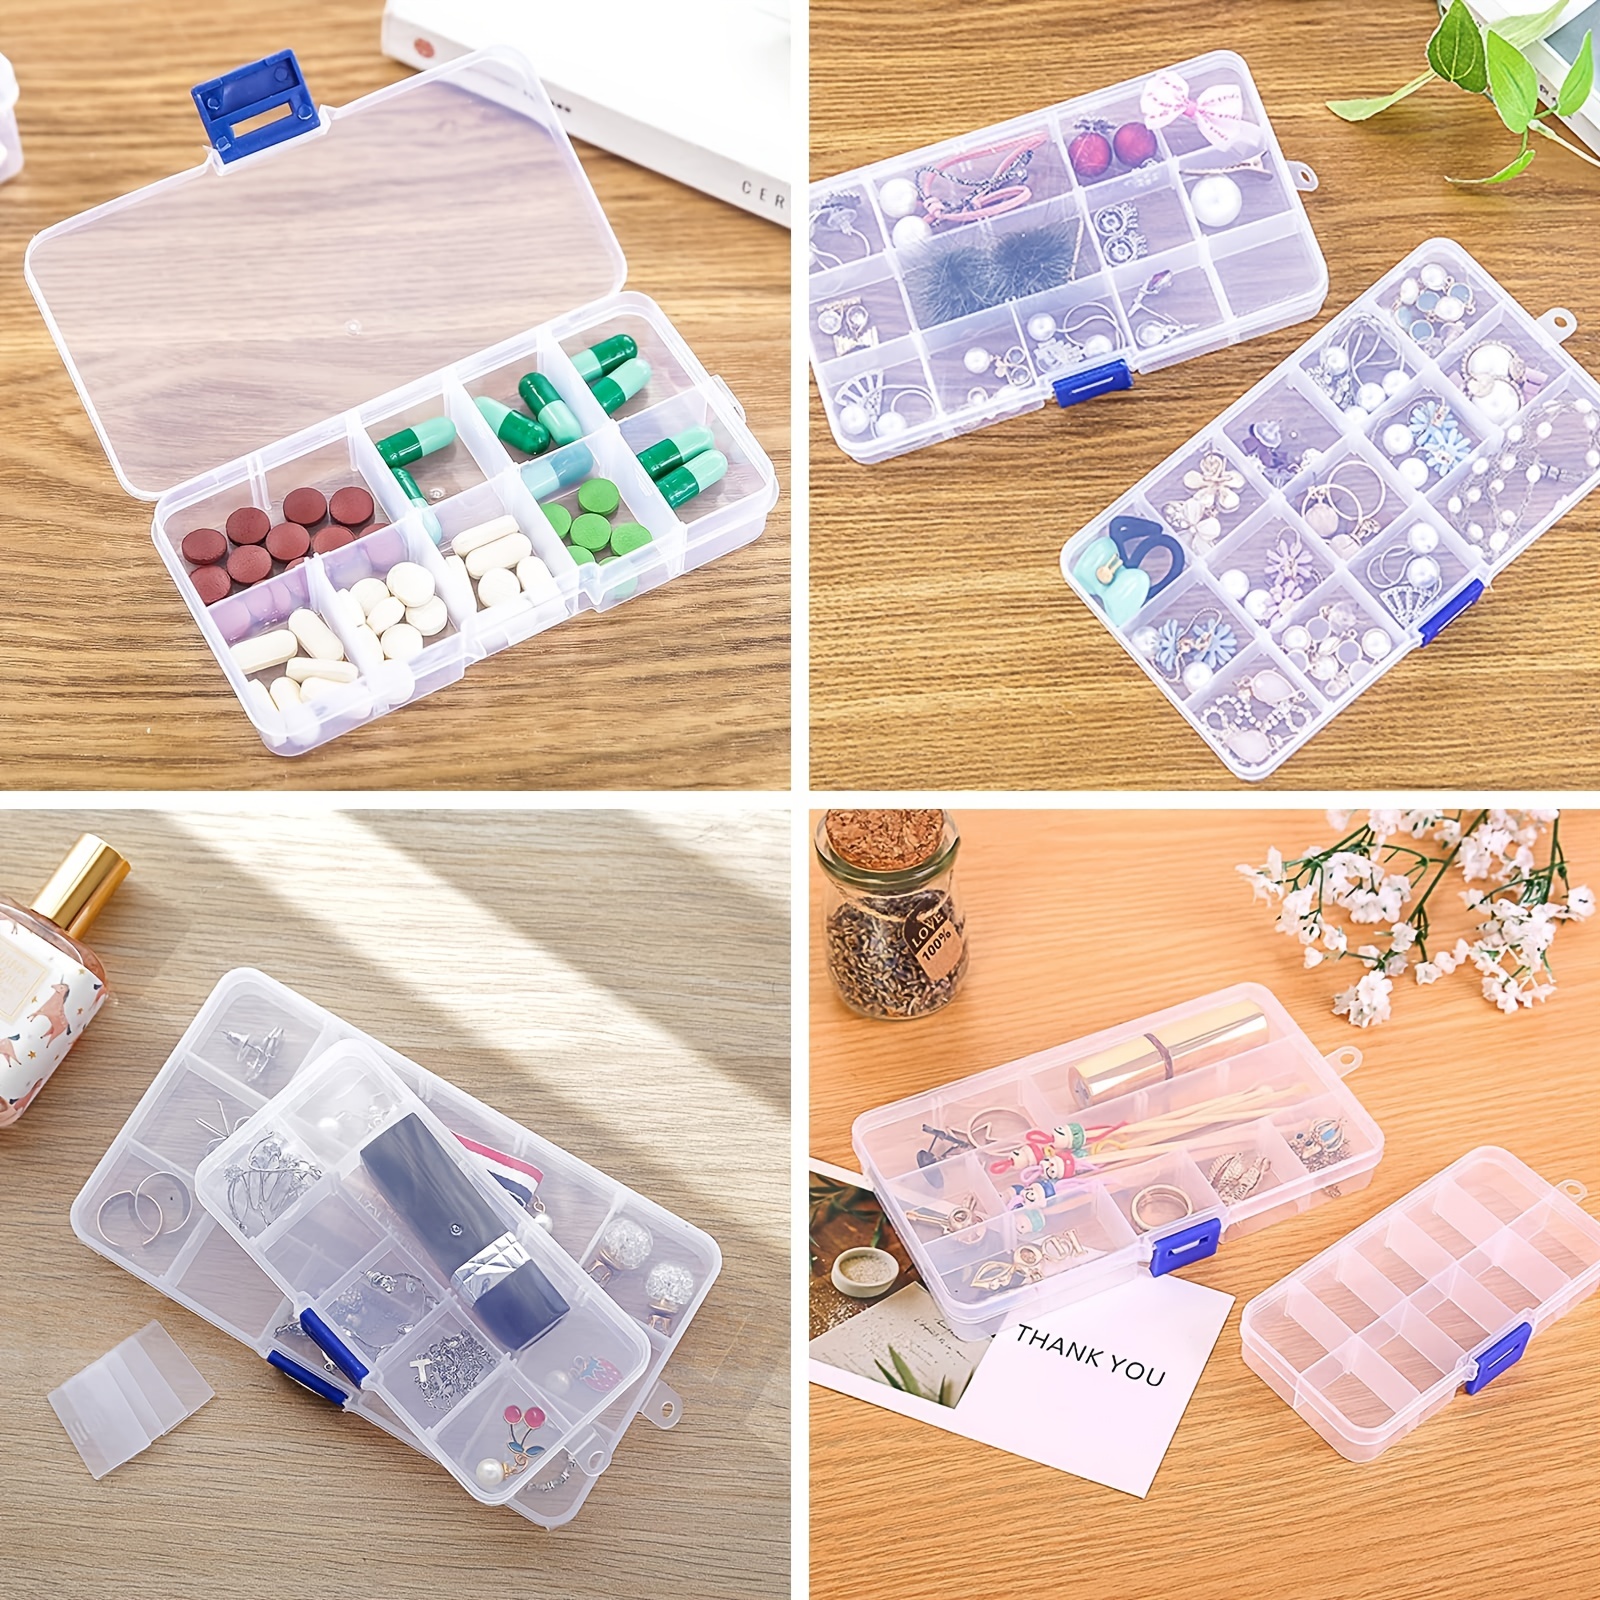 2 PCS Plastic Tray, Grids Bead Organizer With Movable Dividers Storage-  Adjustable Clear Compartment Plastic Organizer-Travel Organizer Box, Small  Parts Organizer For Beads, Jewlery, Rings 